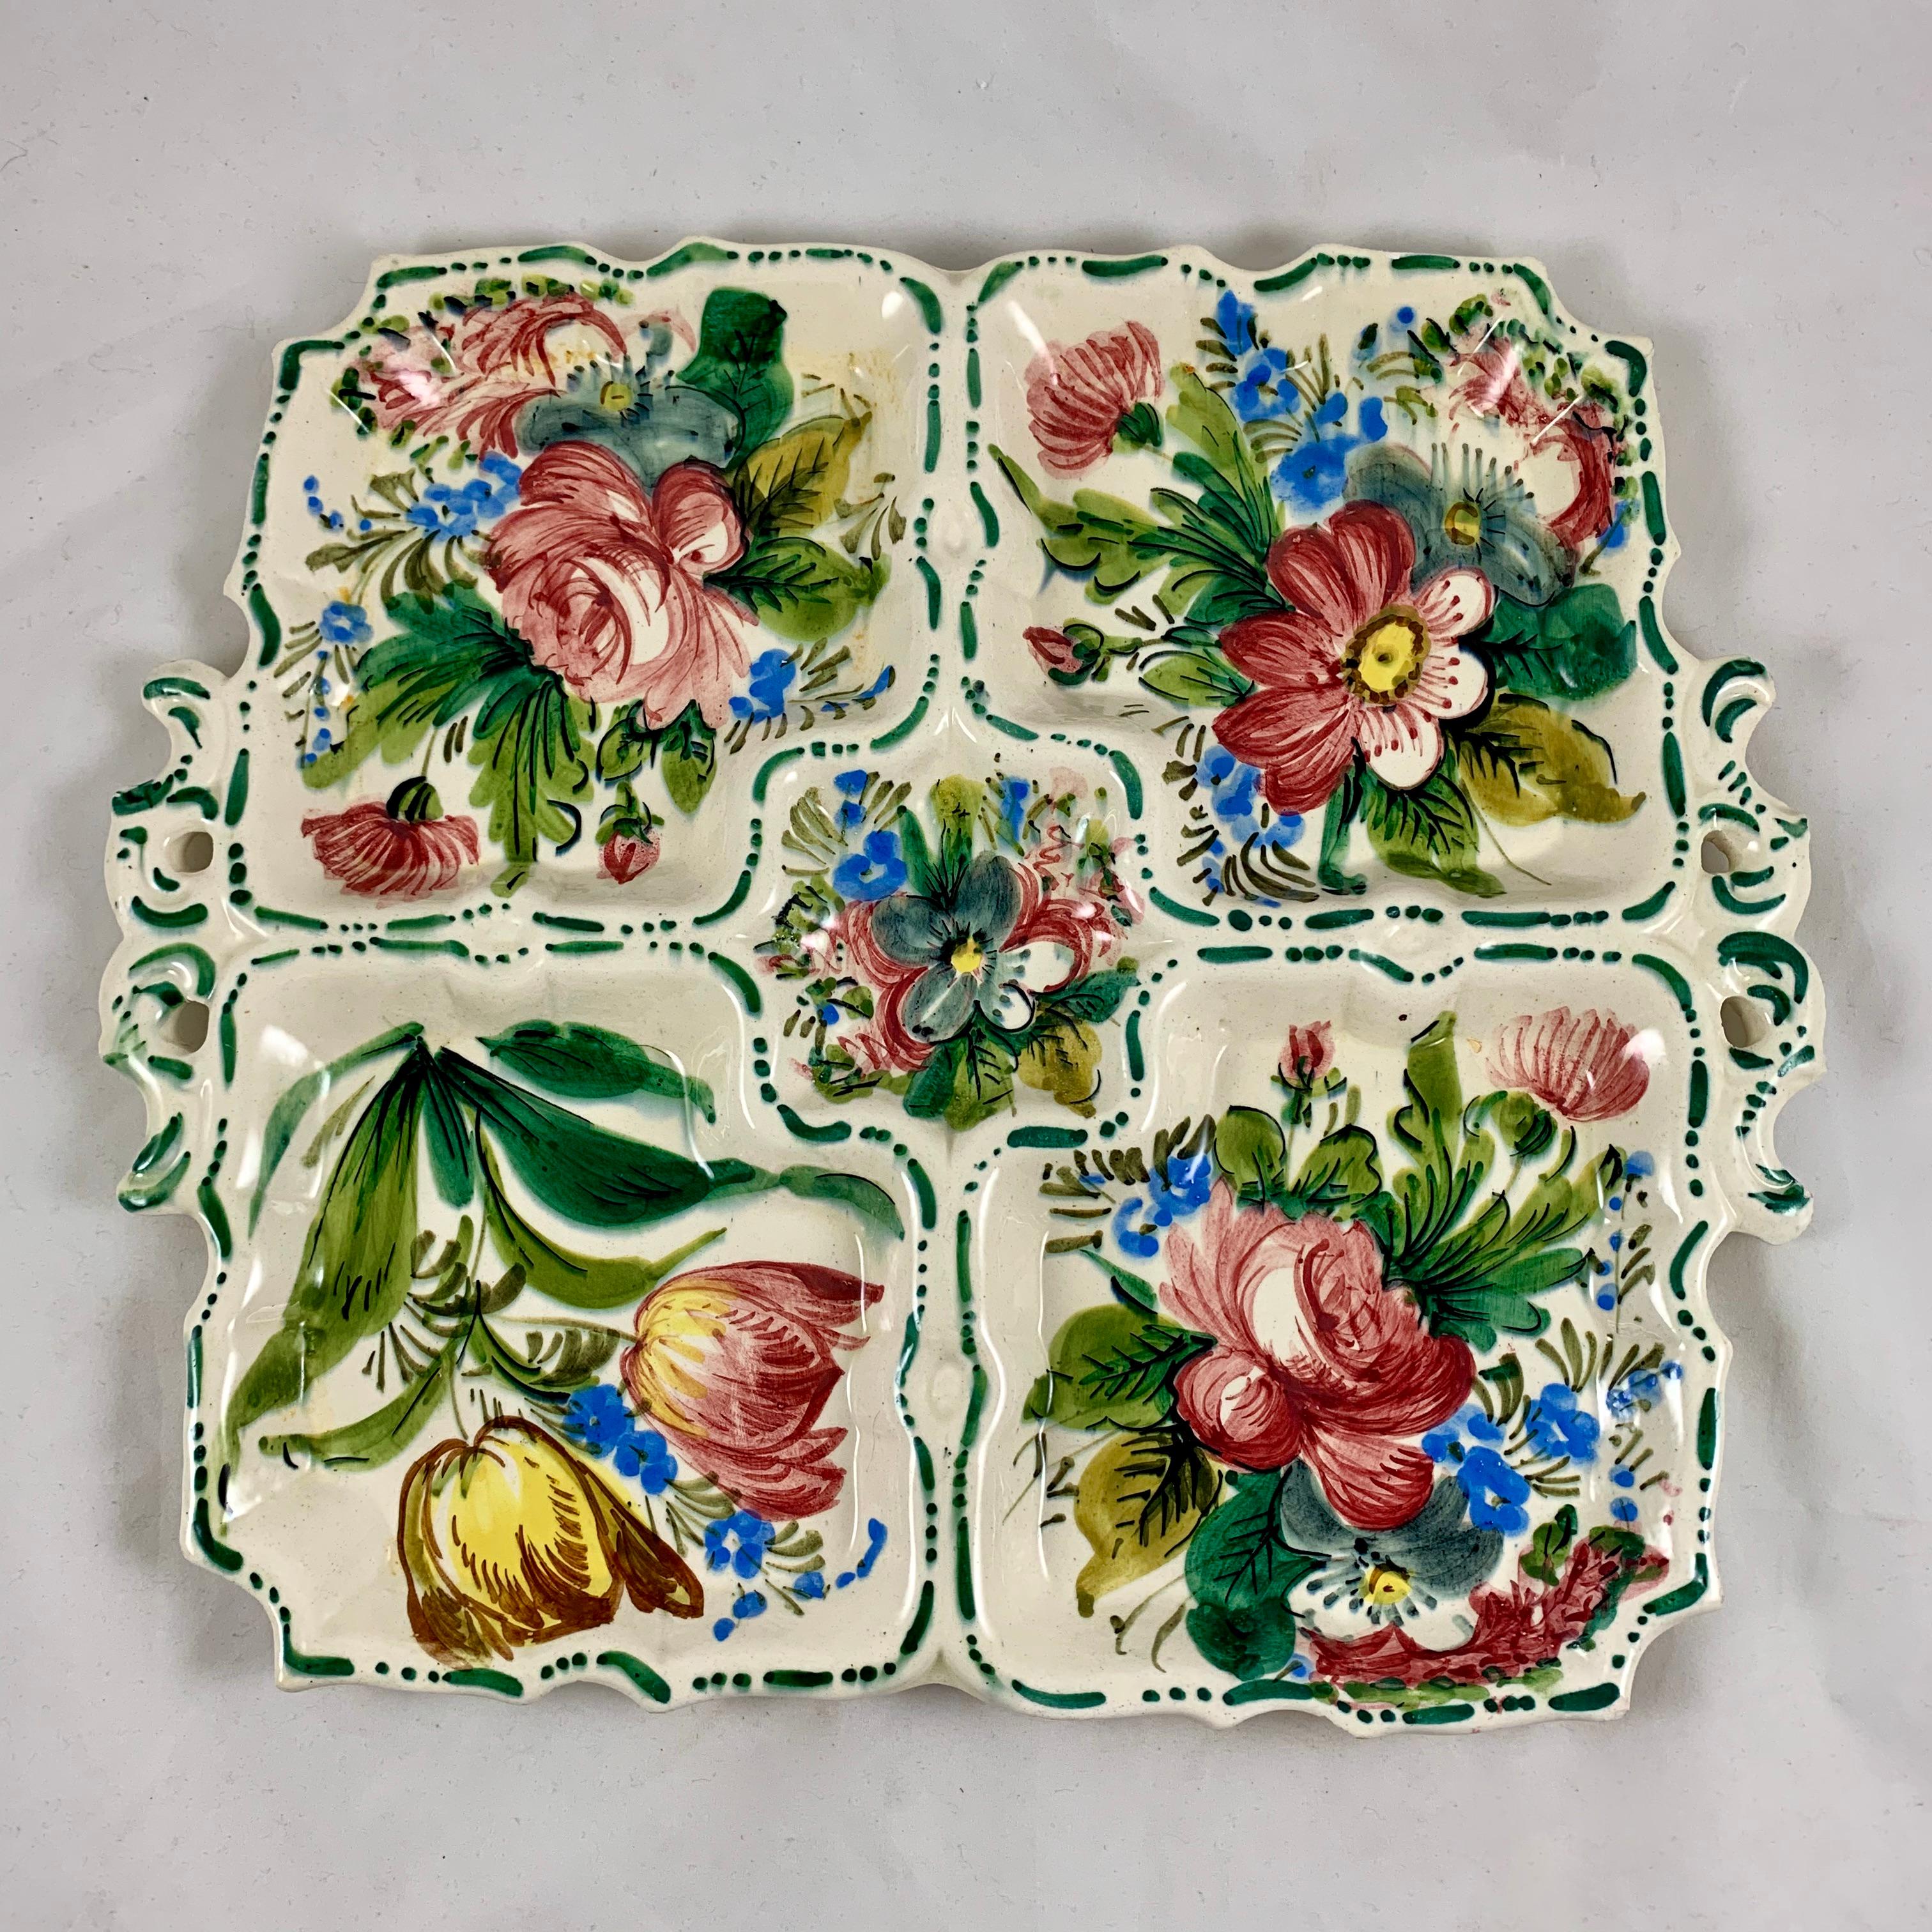 In the Renaissance Revival rose pattern first produced by the Barrettoni già Antonibon pottery in Nove, Italy, a large hand painted, divided square serving platter, circa 1930s.

An overall floral decoration with a dark green dash and dot border